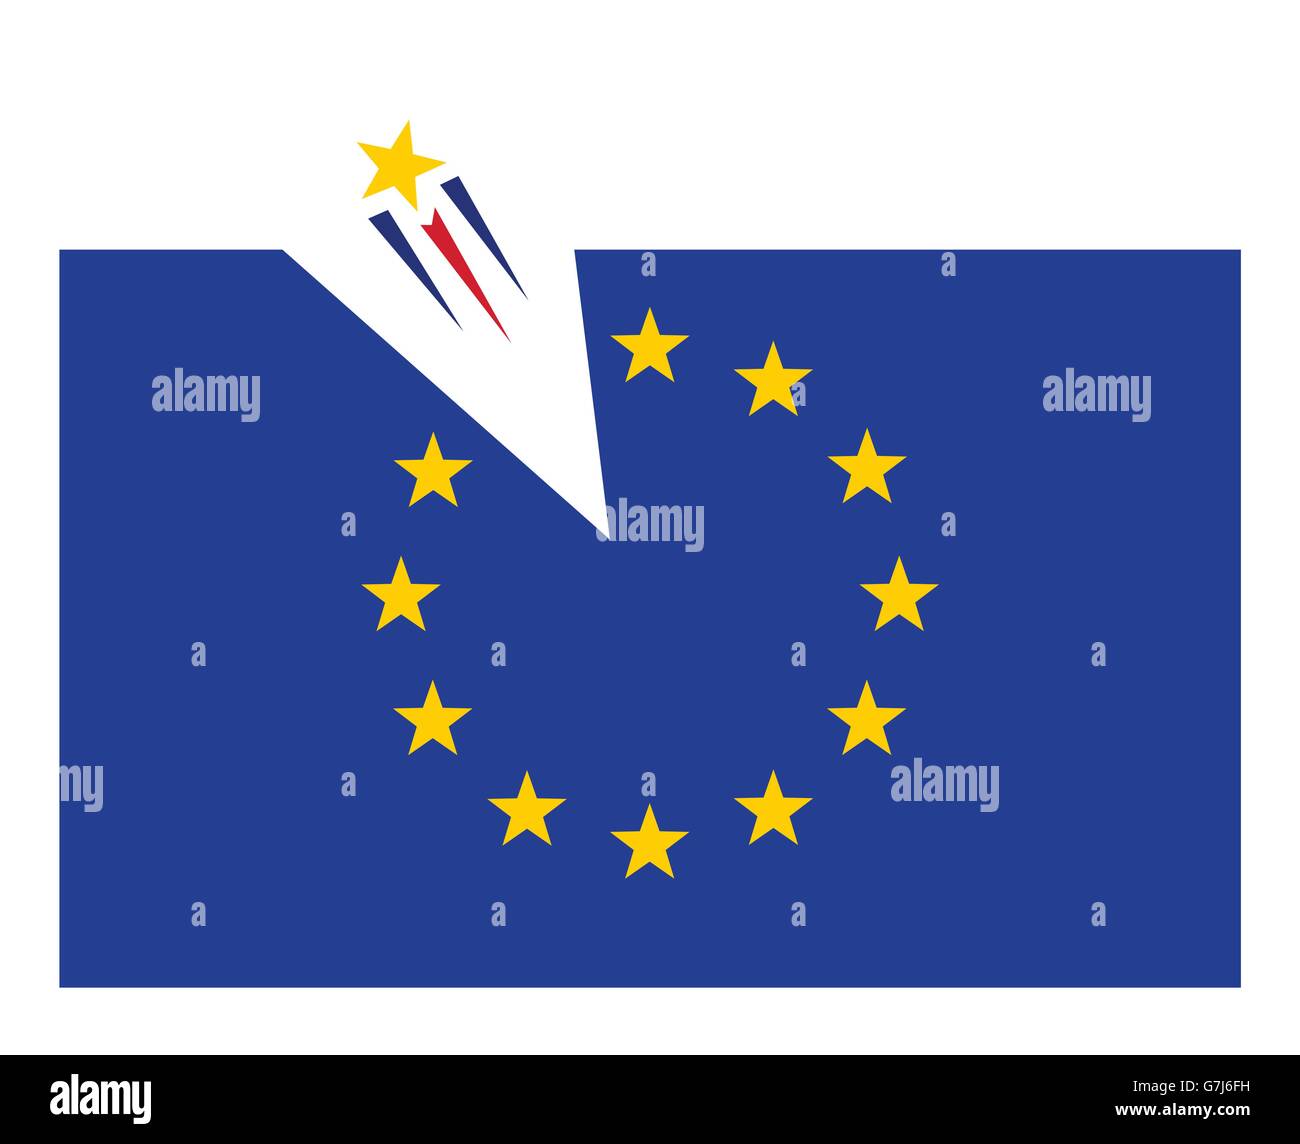 one star flying out from europian union flag vector illustration Stock Vector